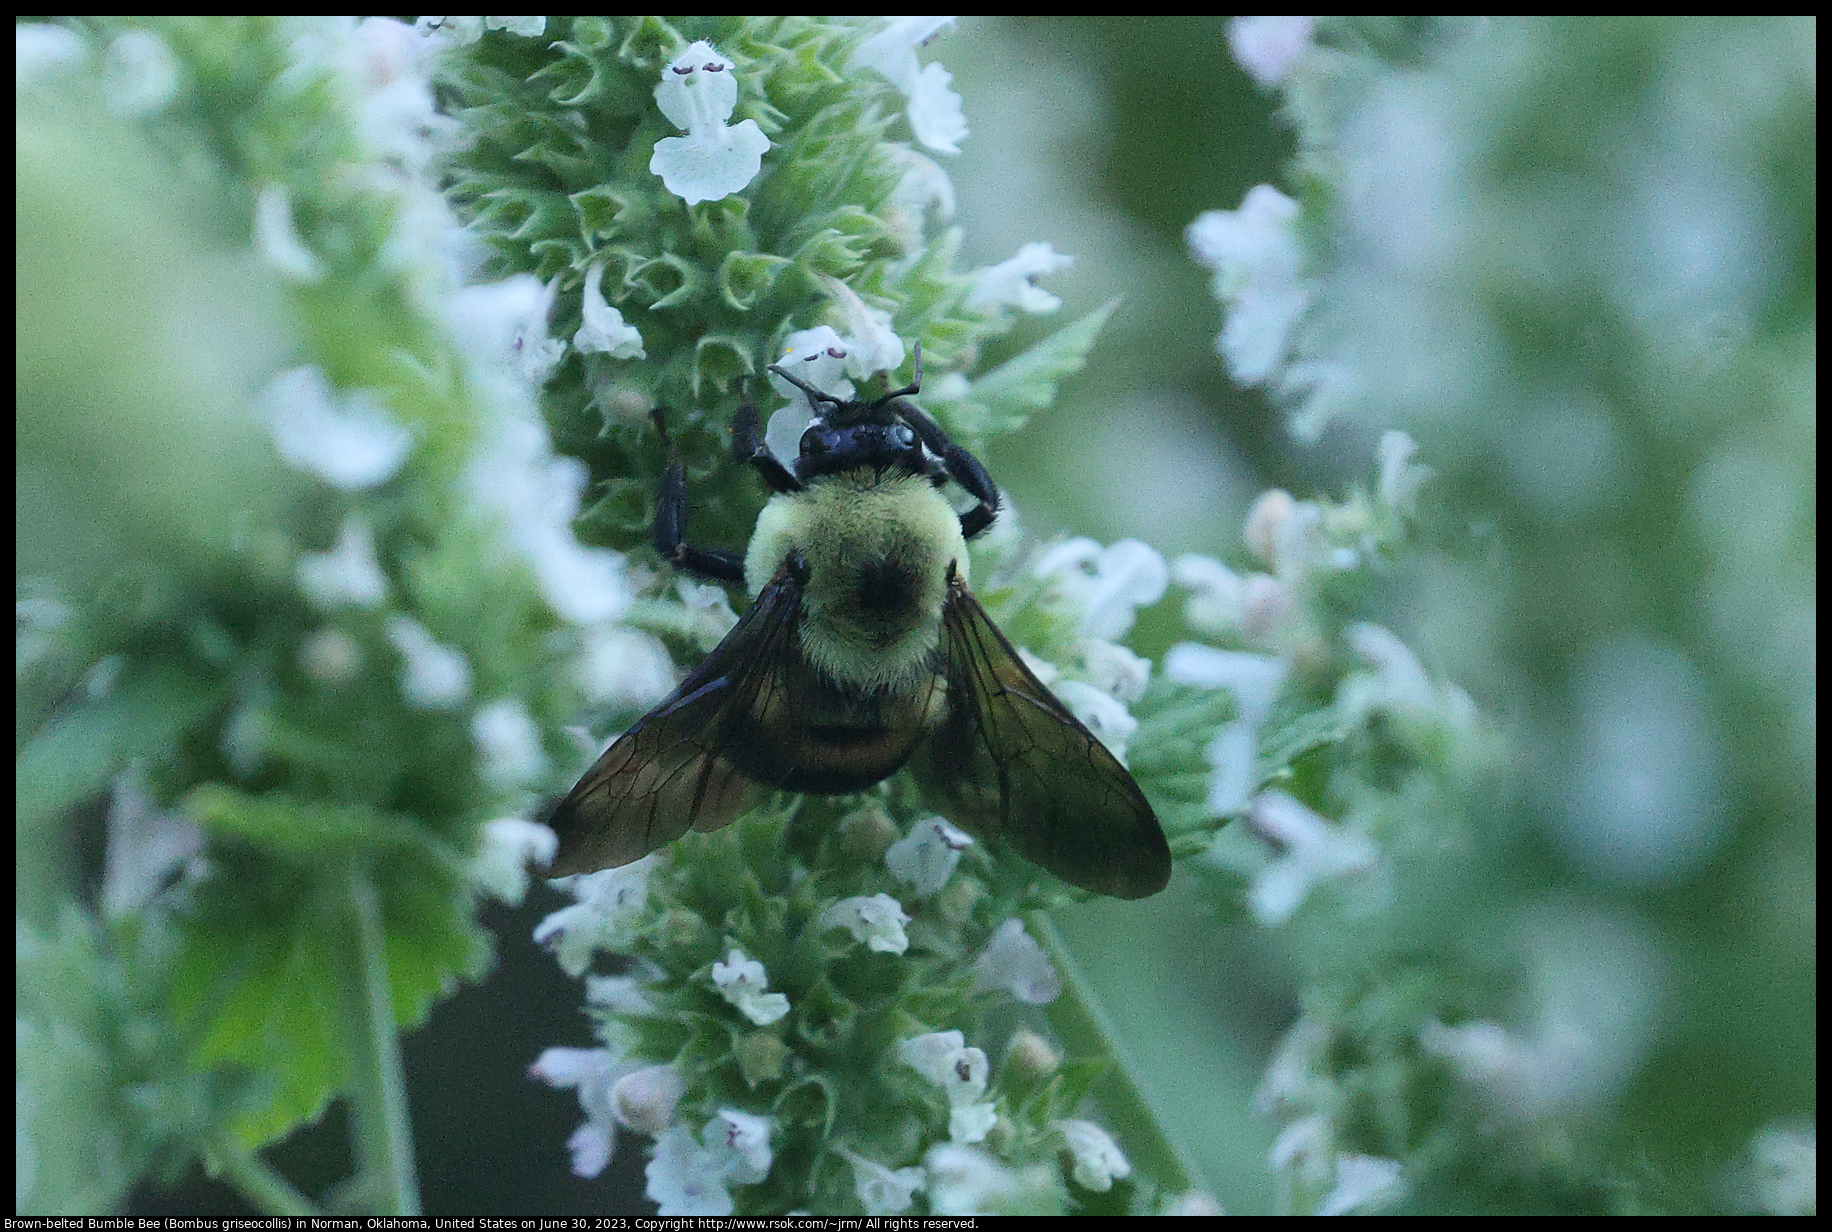 Brown-belted Bumble Bee (Bombus griseocollis) in Norman, Oklahoma, United States on June 30, 2023